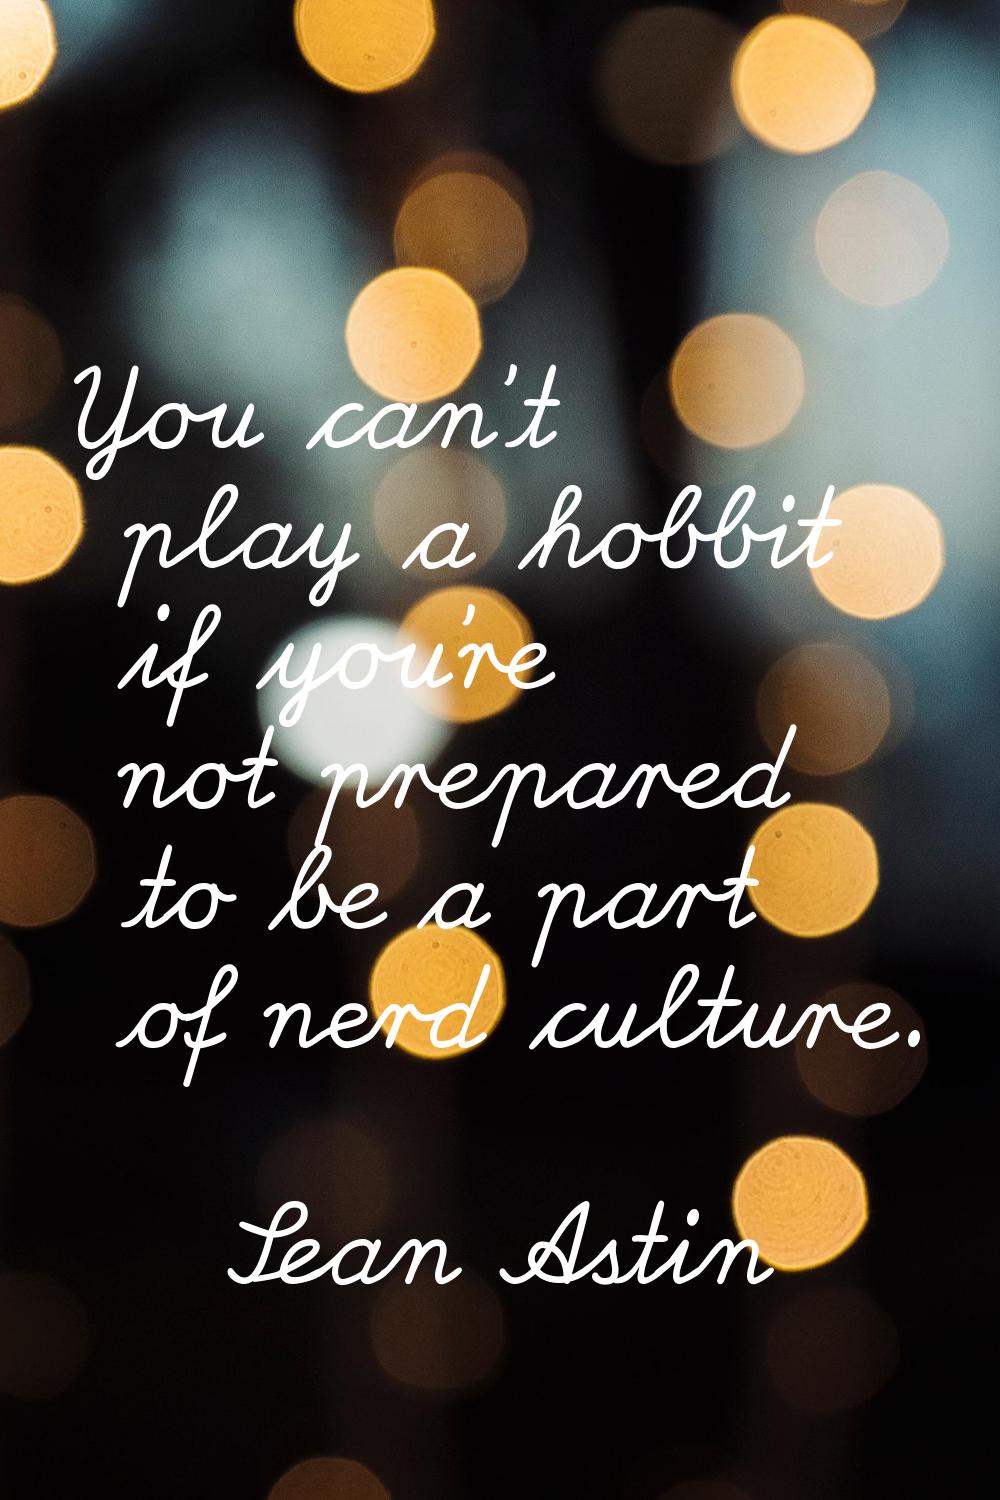 You can't play a hobbit if you're not prepared to be a part of nerd culture.